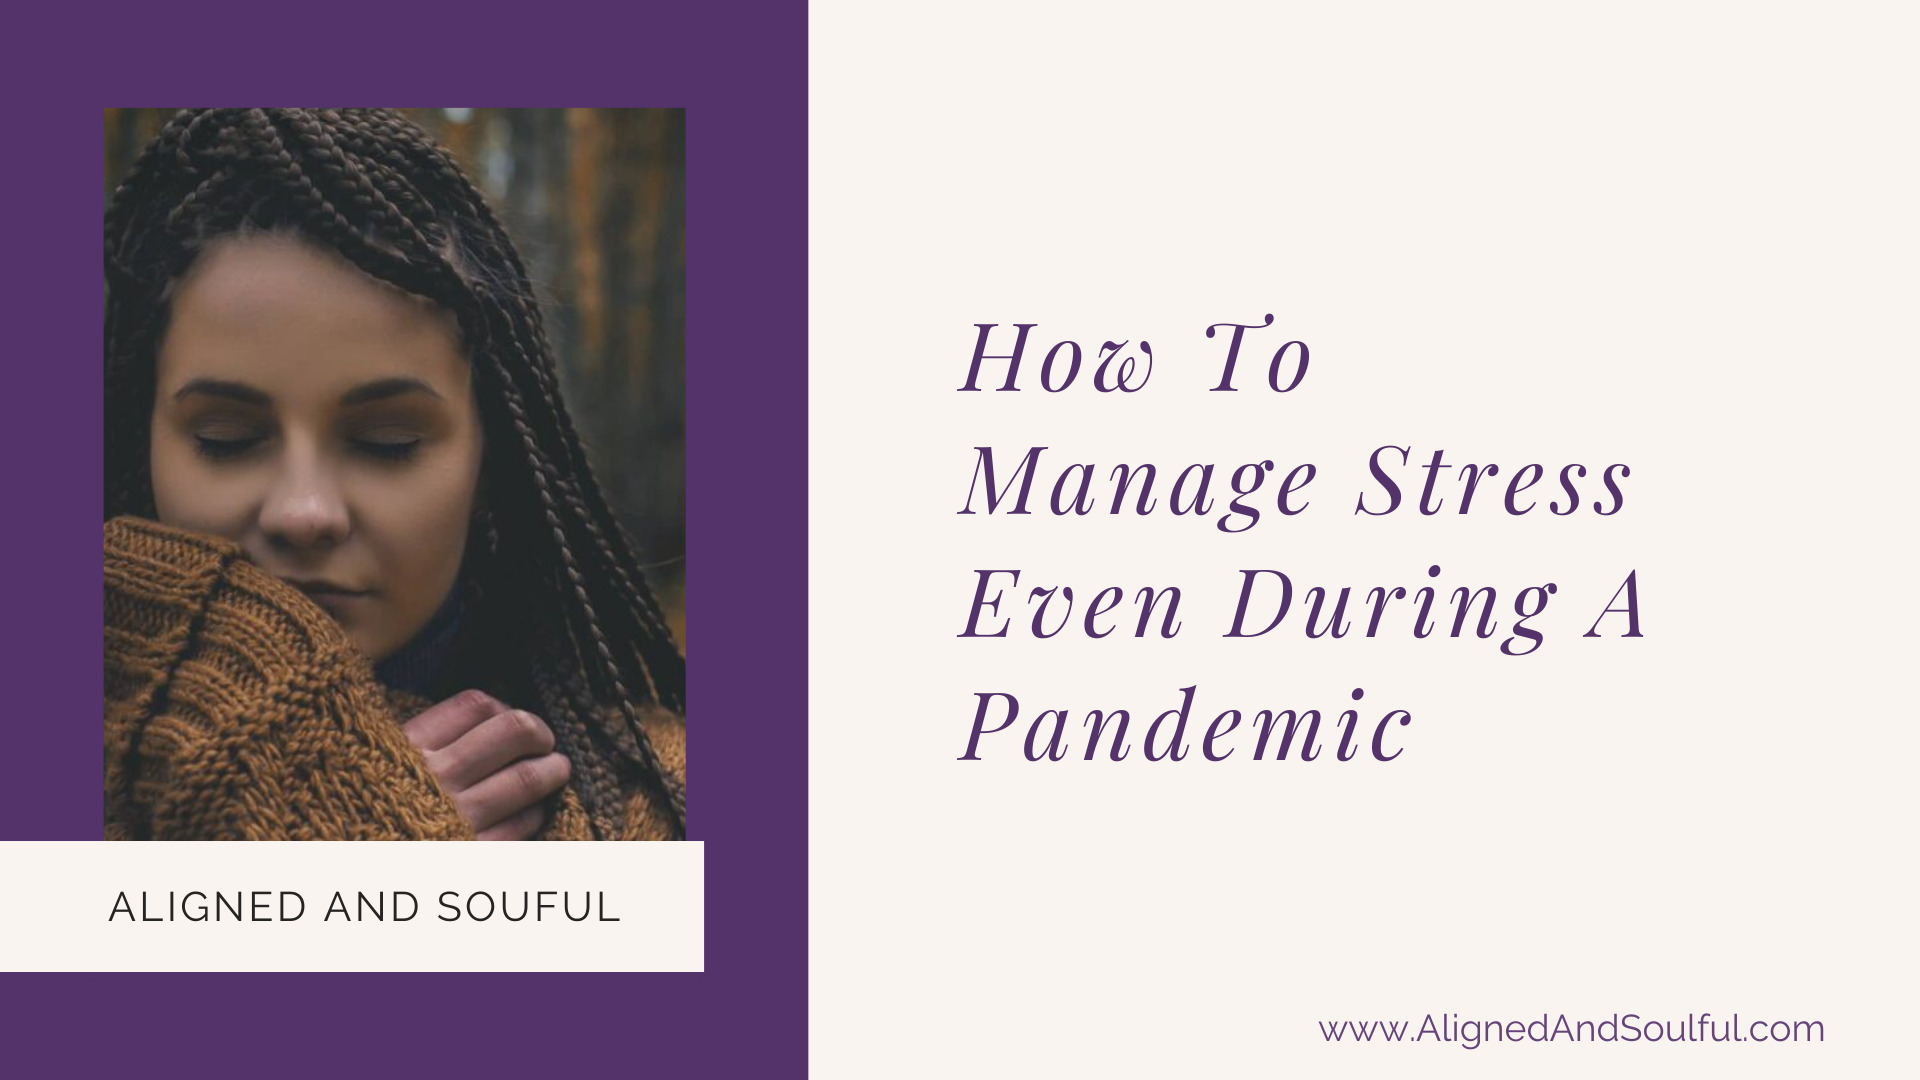 How to Manage Stress Even During a Pandemic